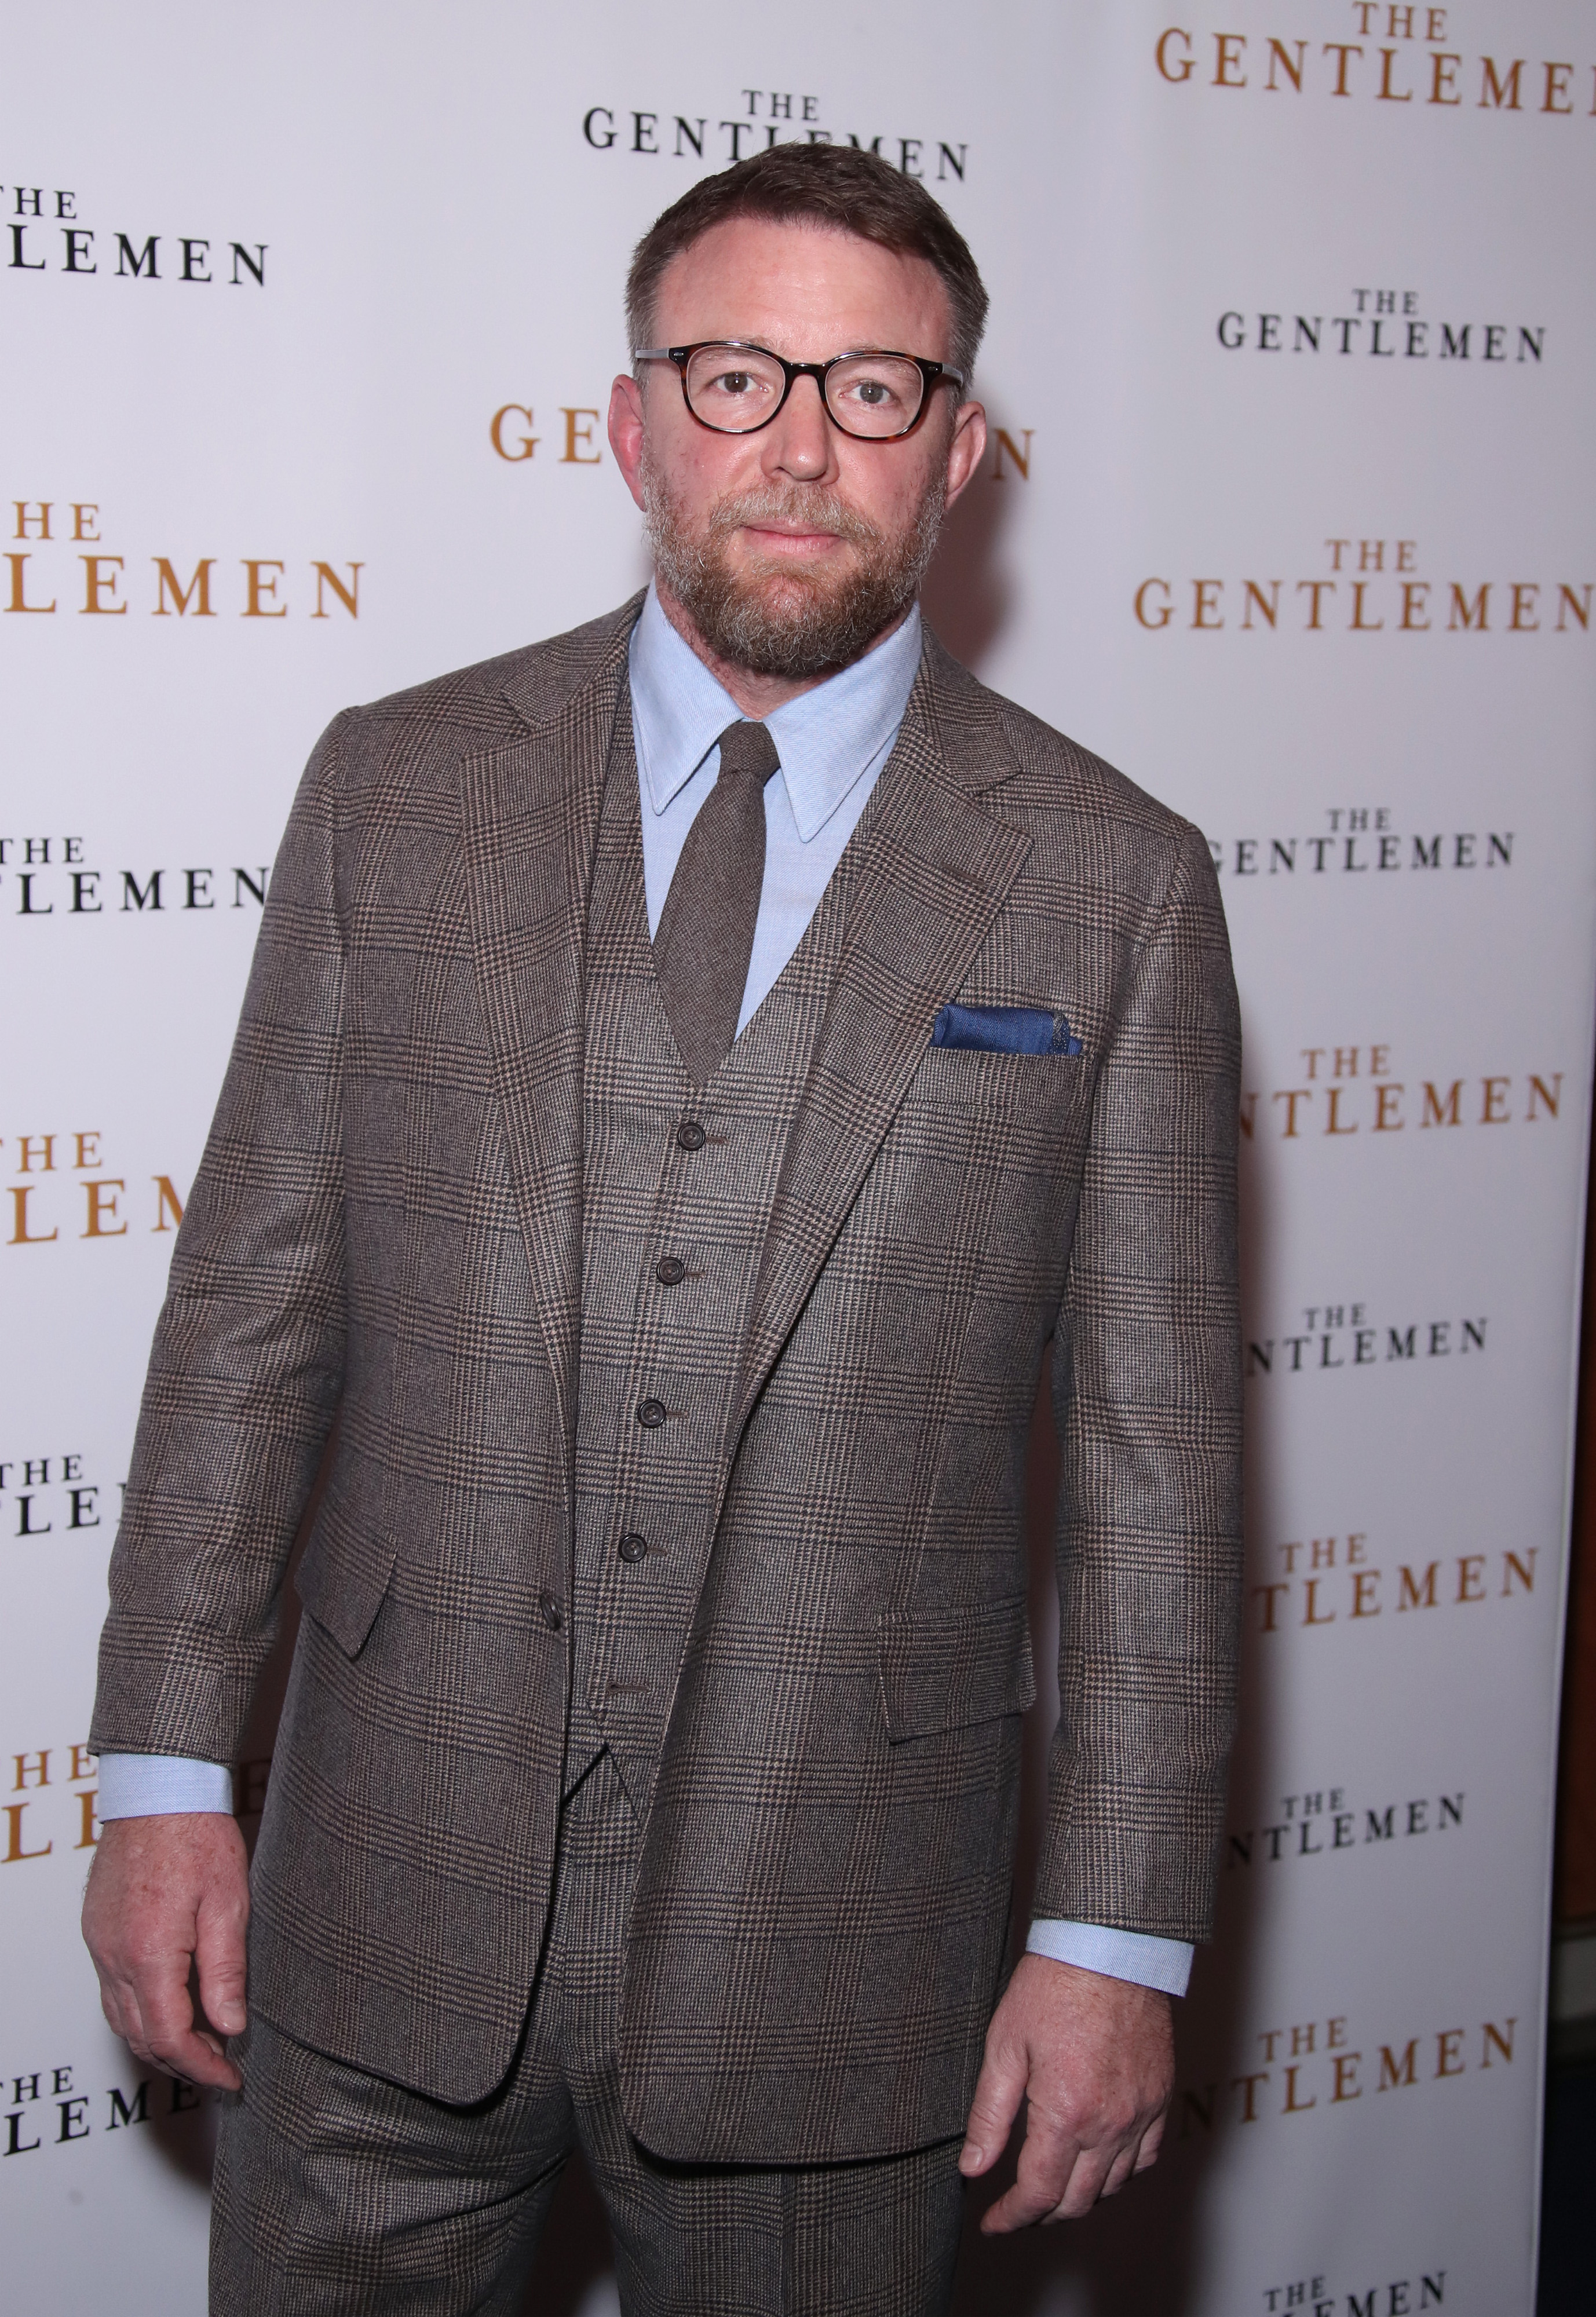 Guy Ritchie at the special screening of "The Gentleman" on December 3, 2019, in London, England. | Source: Getty Images